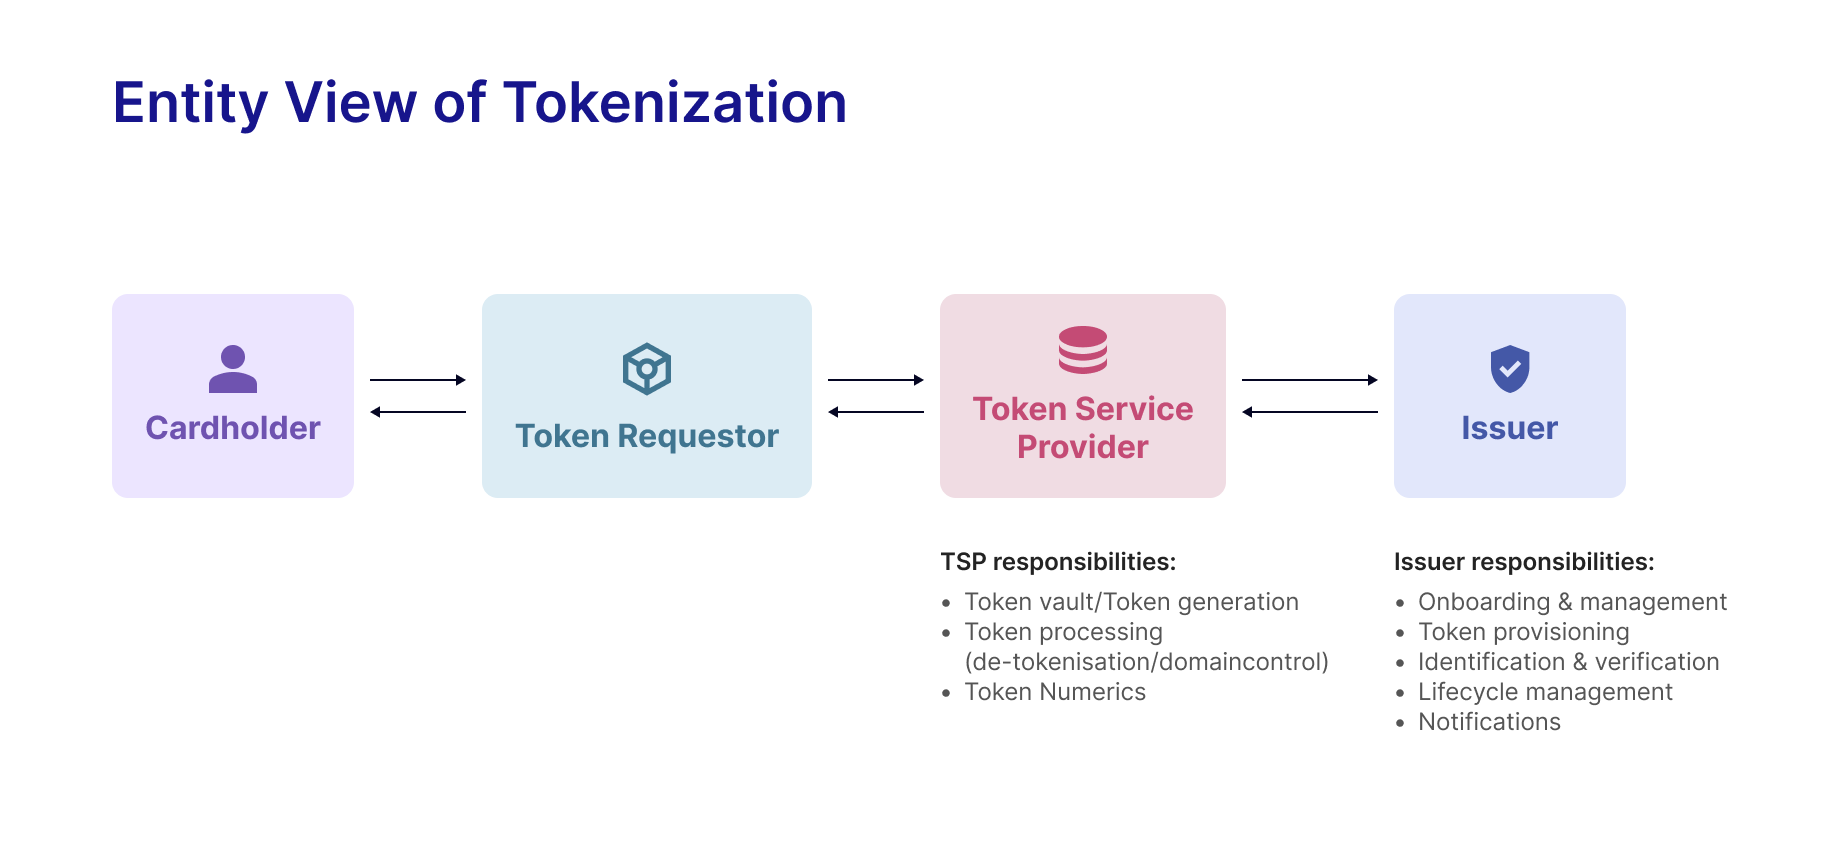 Entities in tokenized card payments